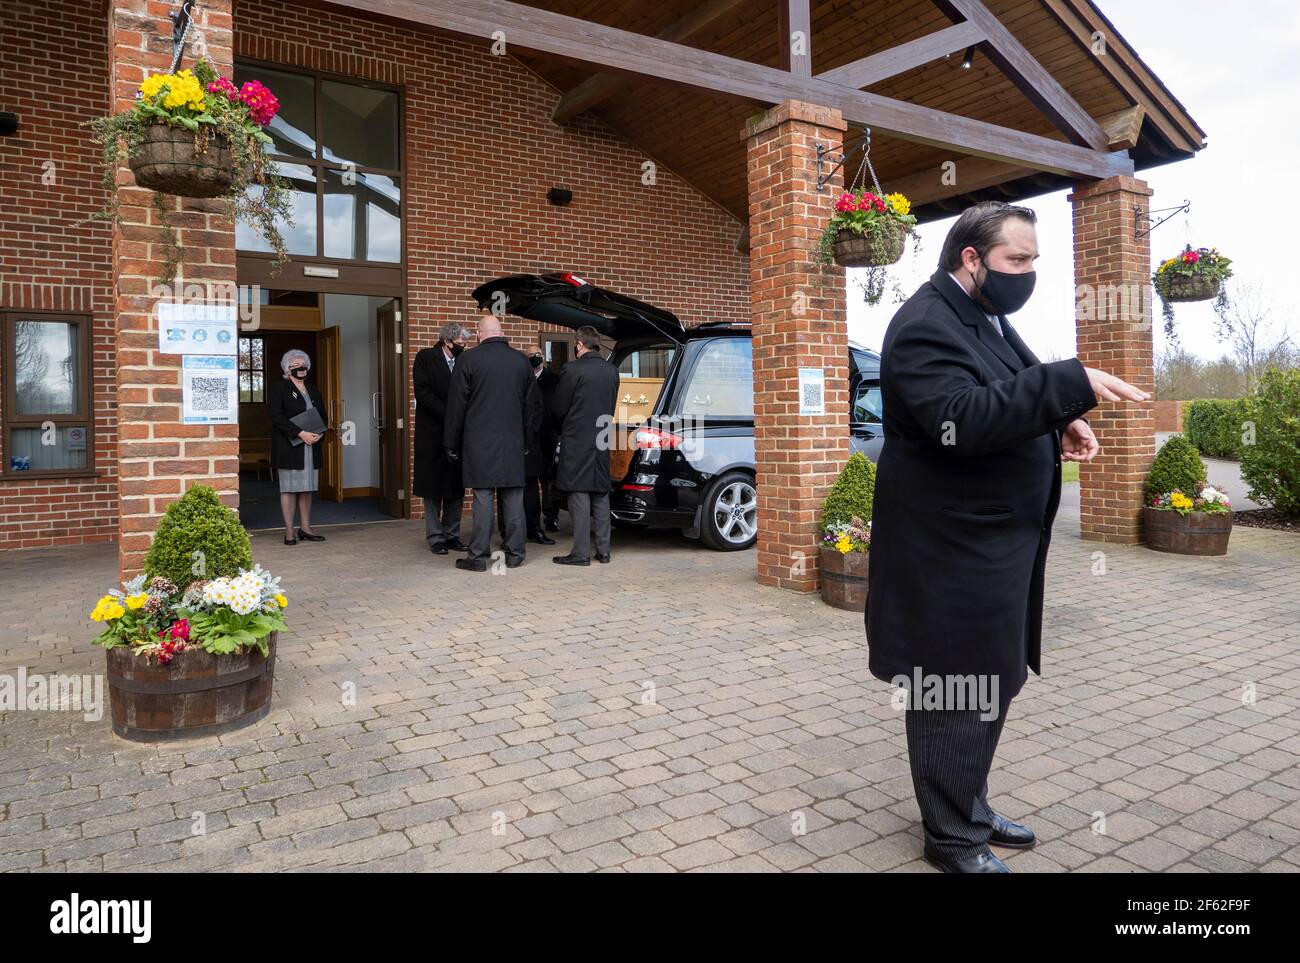 England, UK. 2021. Funeral car, coffin, pallbearers, funeral director standing outside a crematorium before cremation service during Coronavirus time. Stock Photo